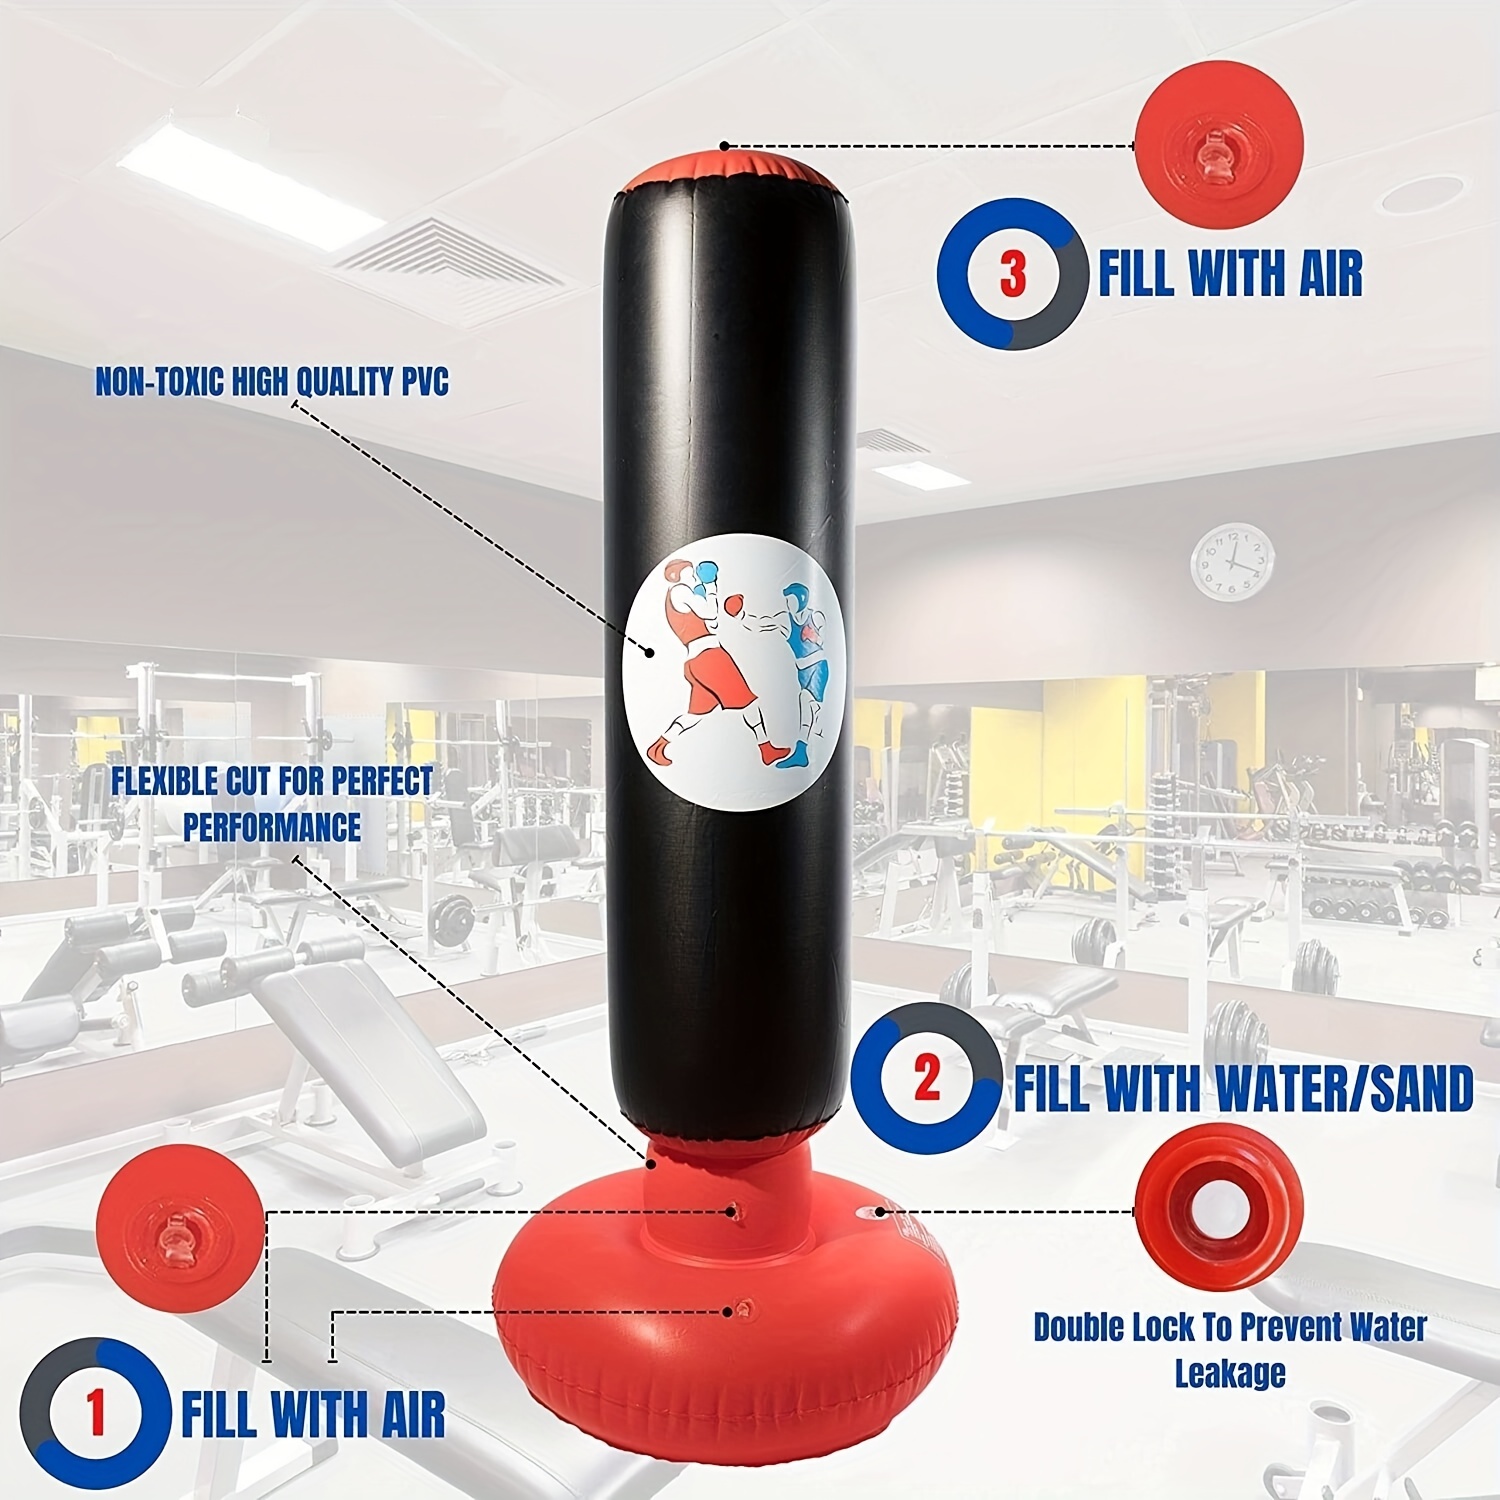 Can You Fill a Punching Bag with Water?